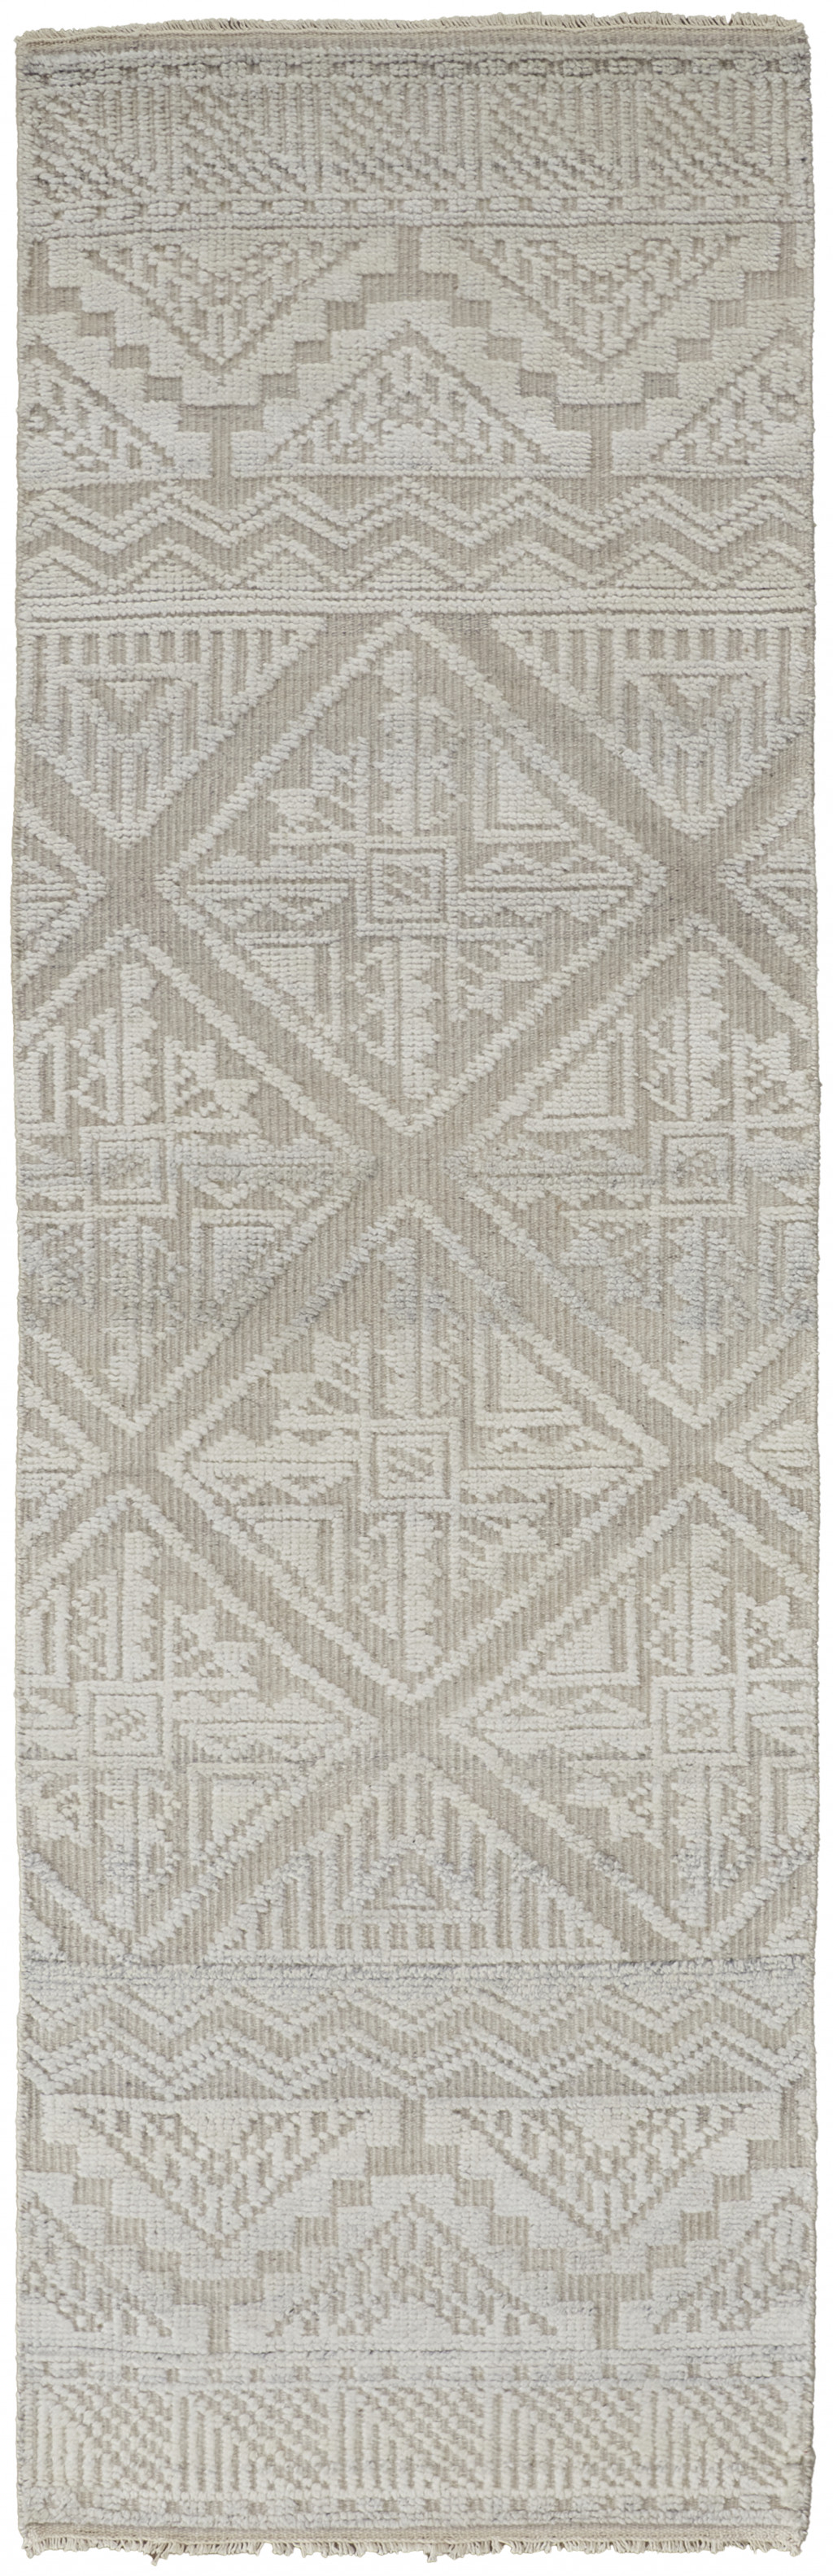 10' Ivory Tan And Gray Geometric Hand Knotted Runner Rug-512585-1